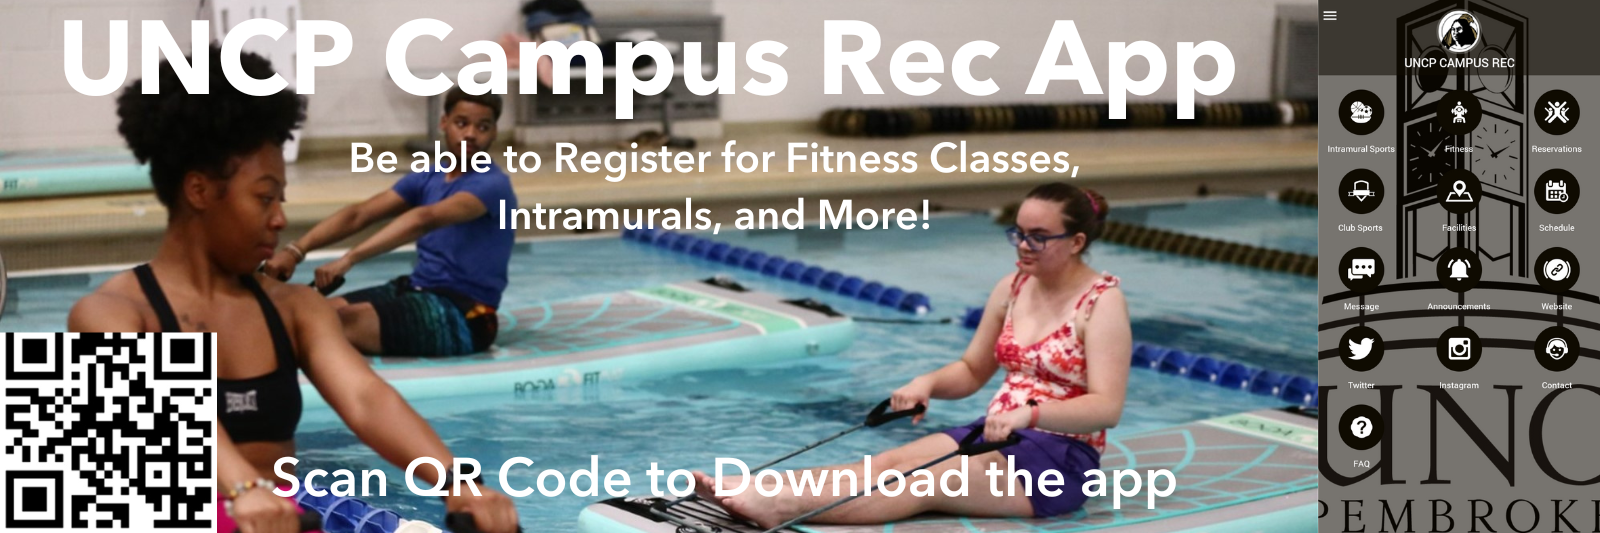 Students doing Water Yoga with Campus Recreation App